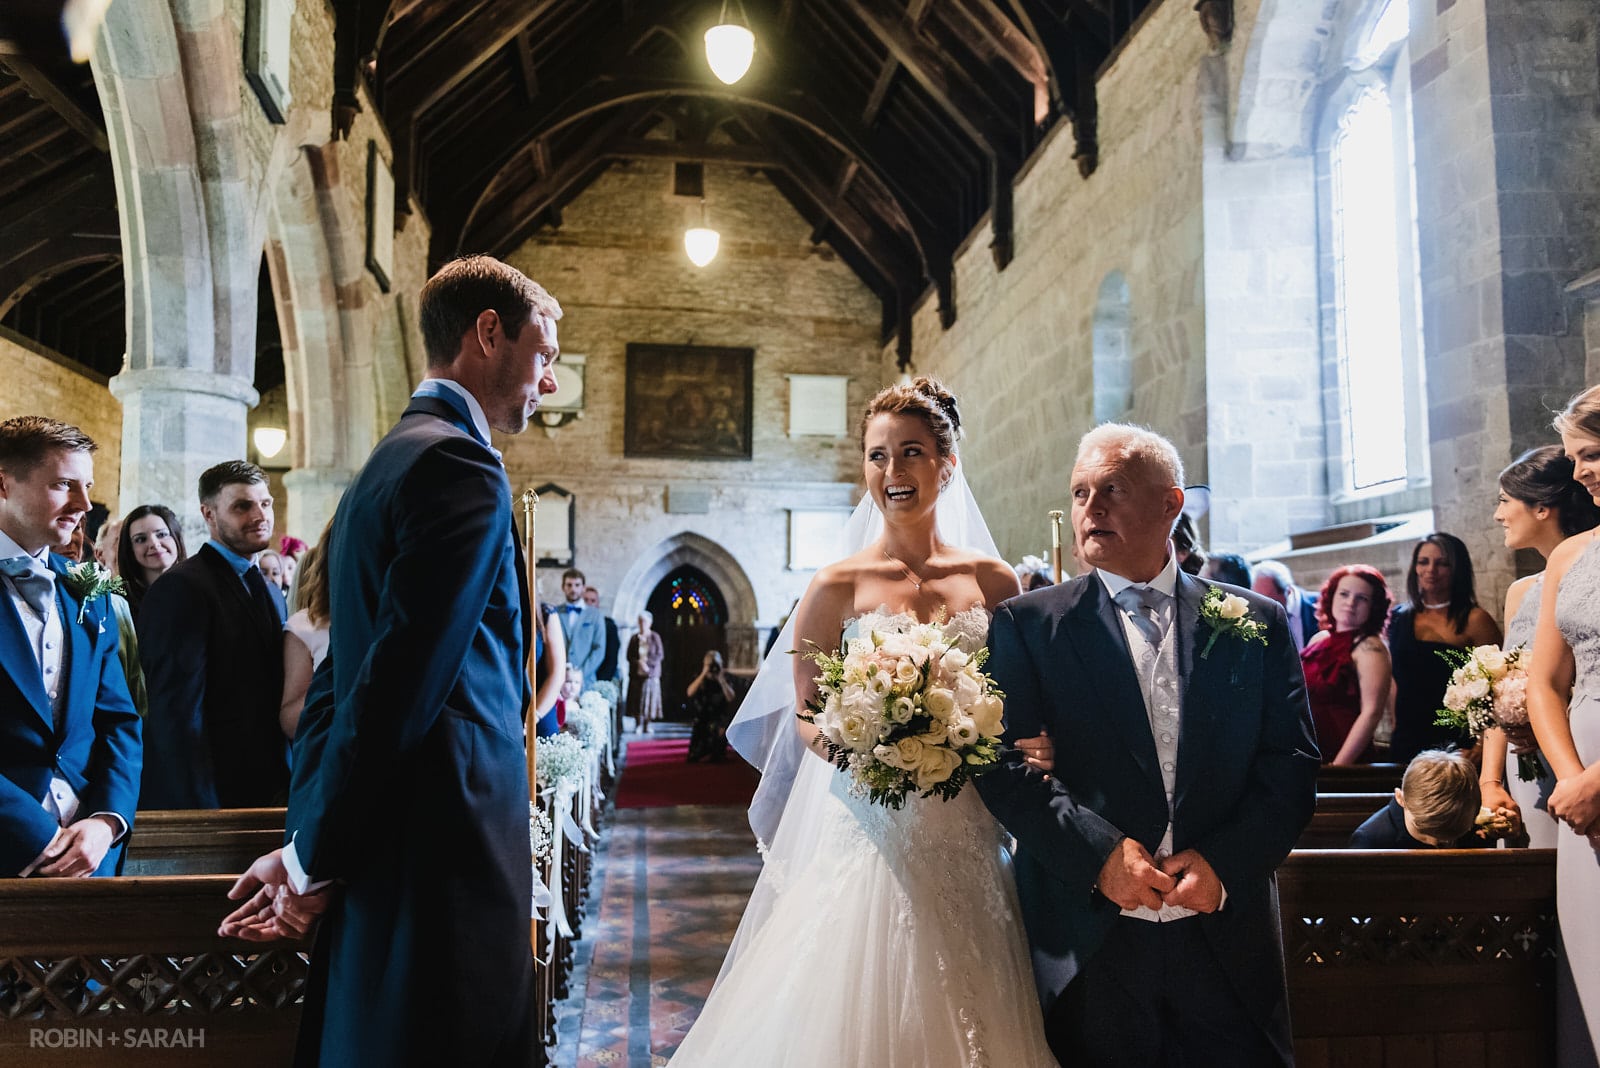 Bride laughs as she sees groom at start of church wedding ceremony